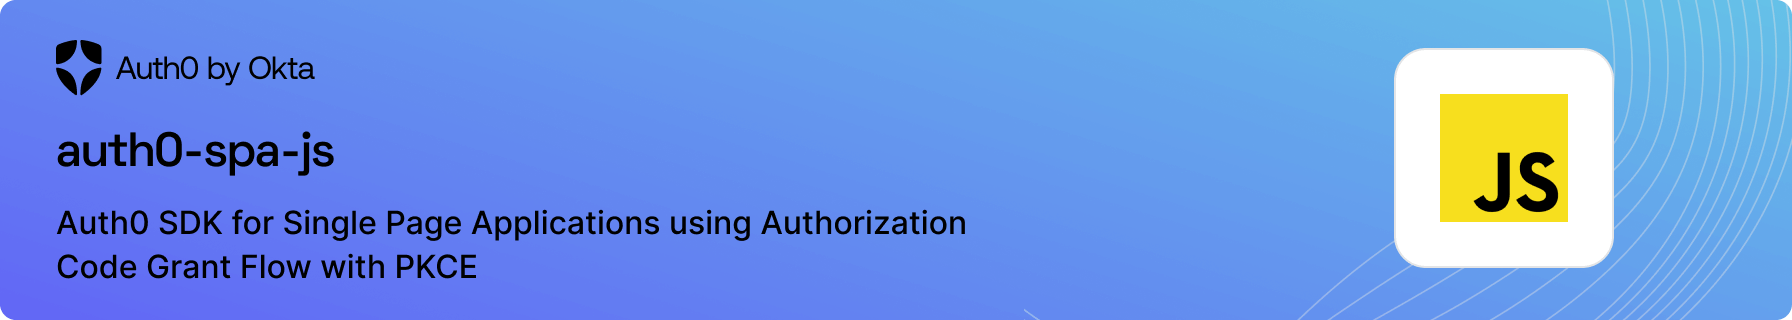 Auth0 SDK for Single Page Applications using Authorization Code Grant Flow with PKCE.